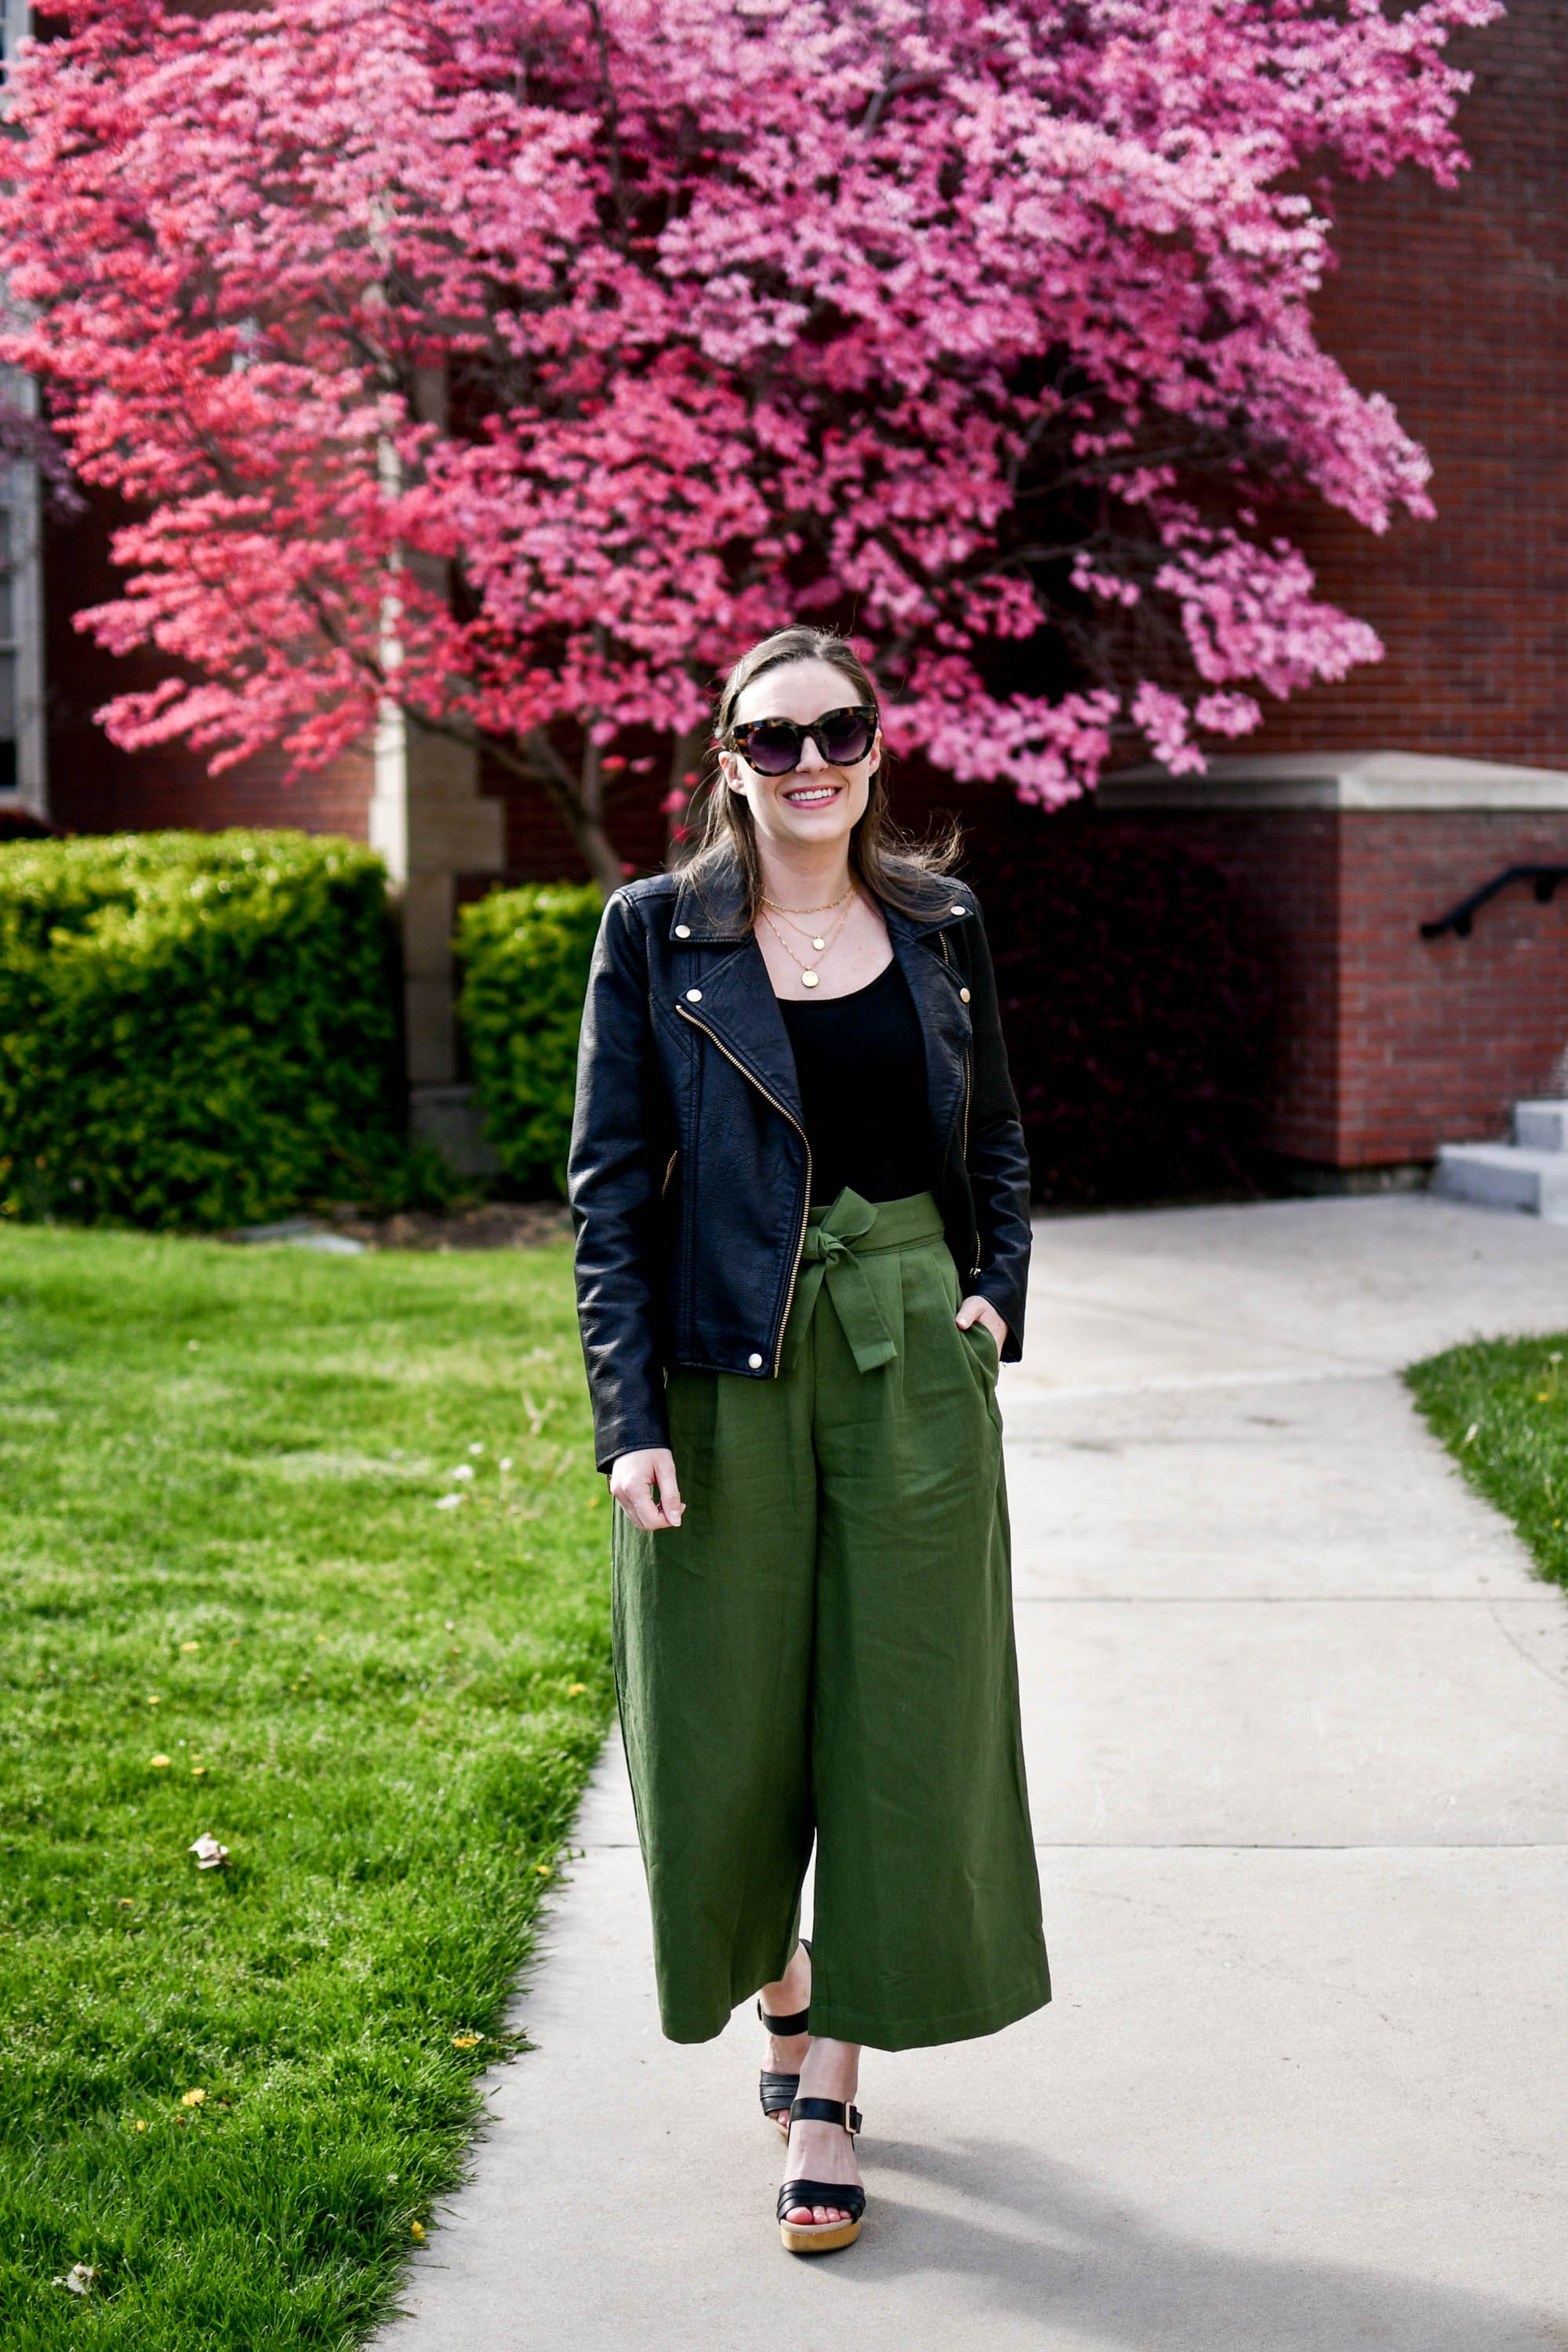 Blazer with Capri Pants Outfits (9 ideas & outfits)